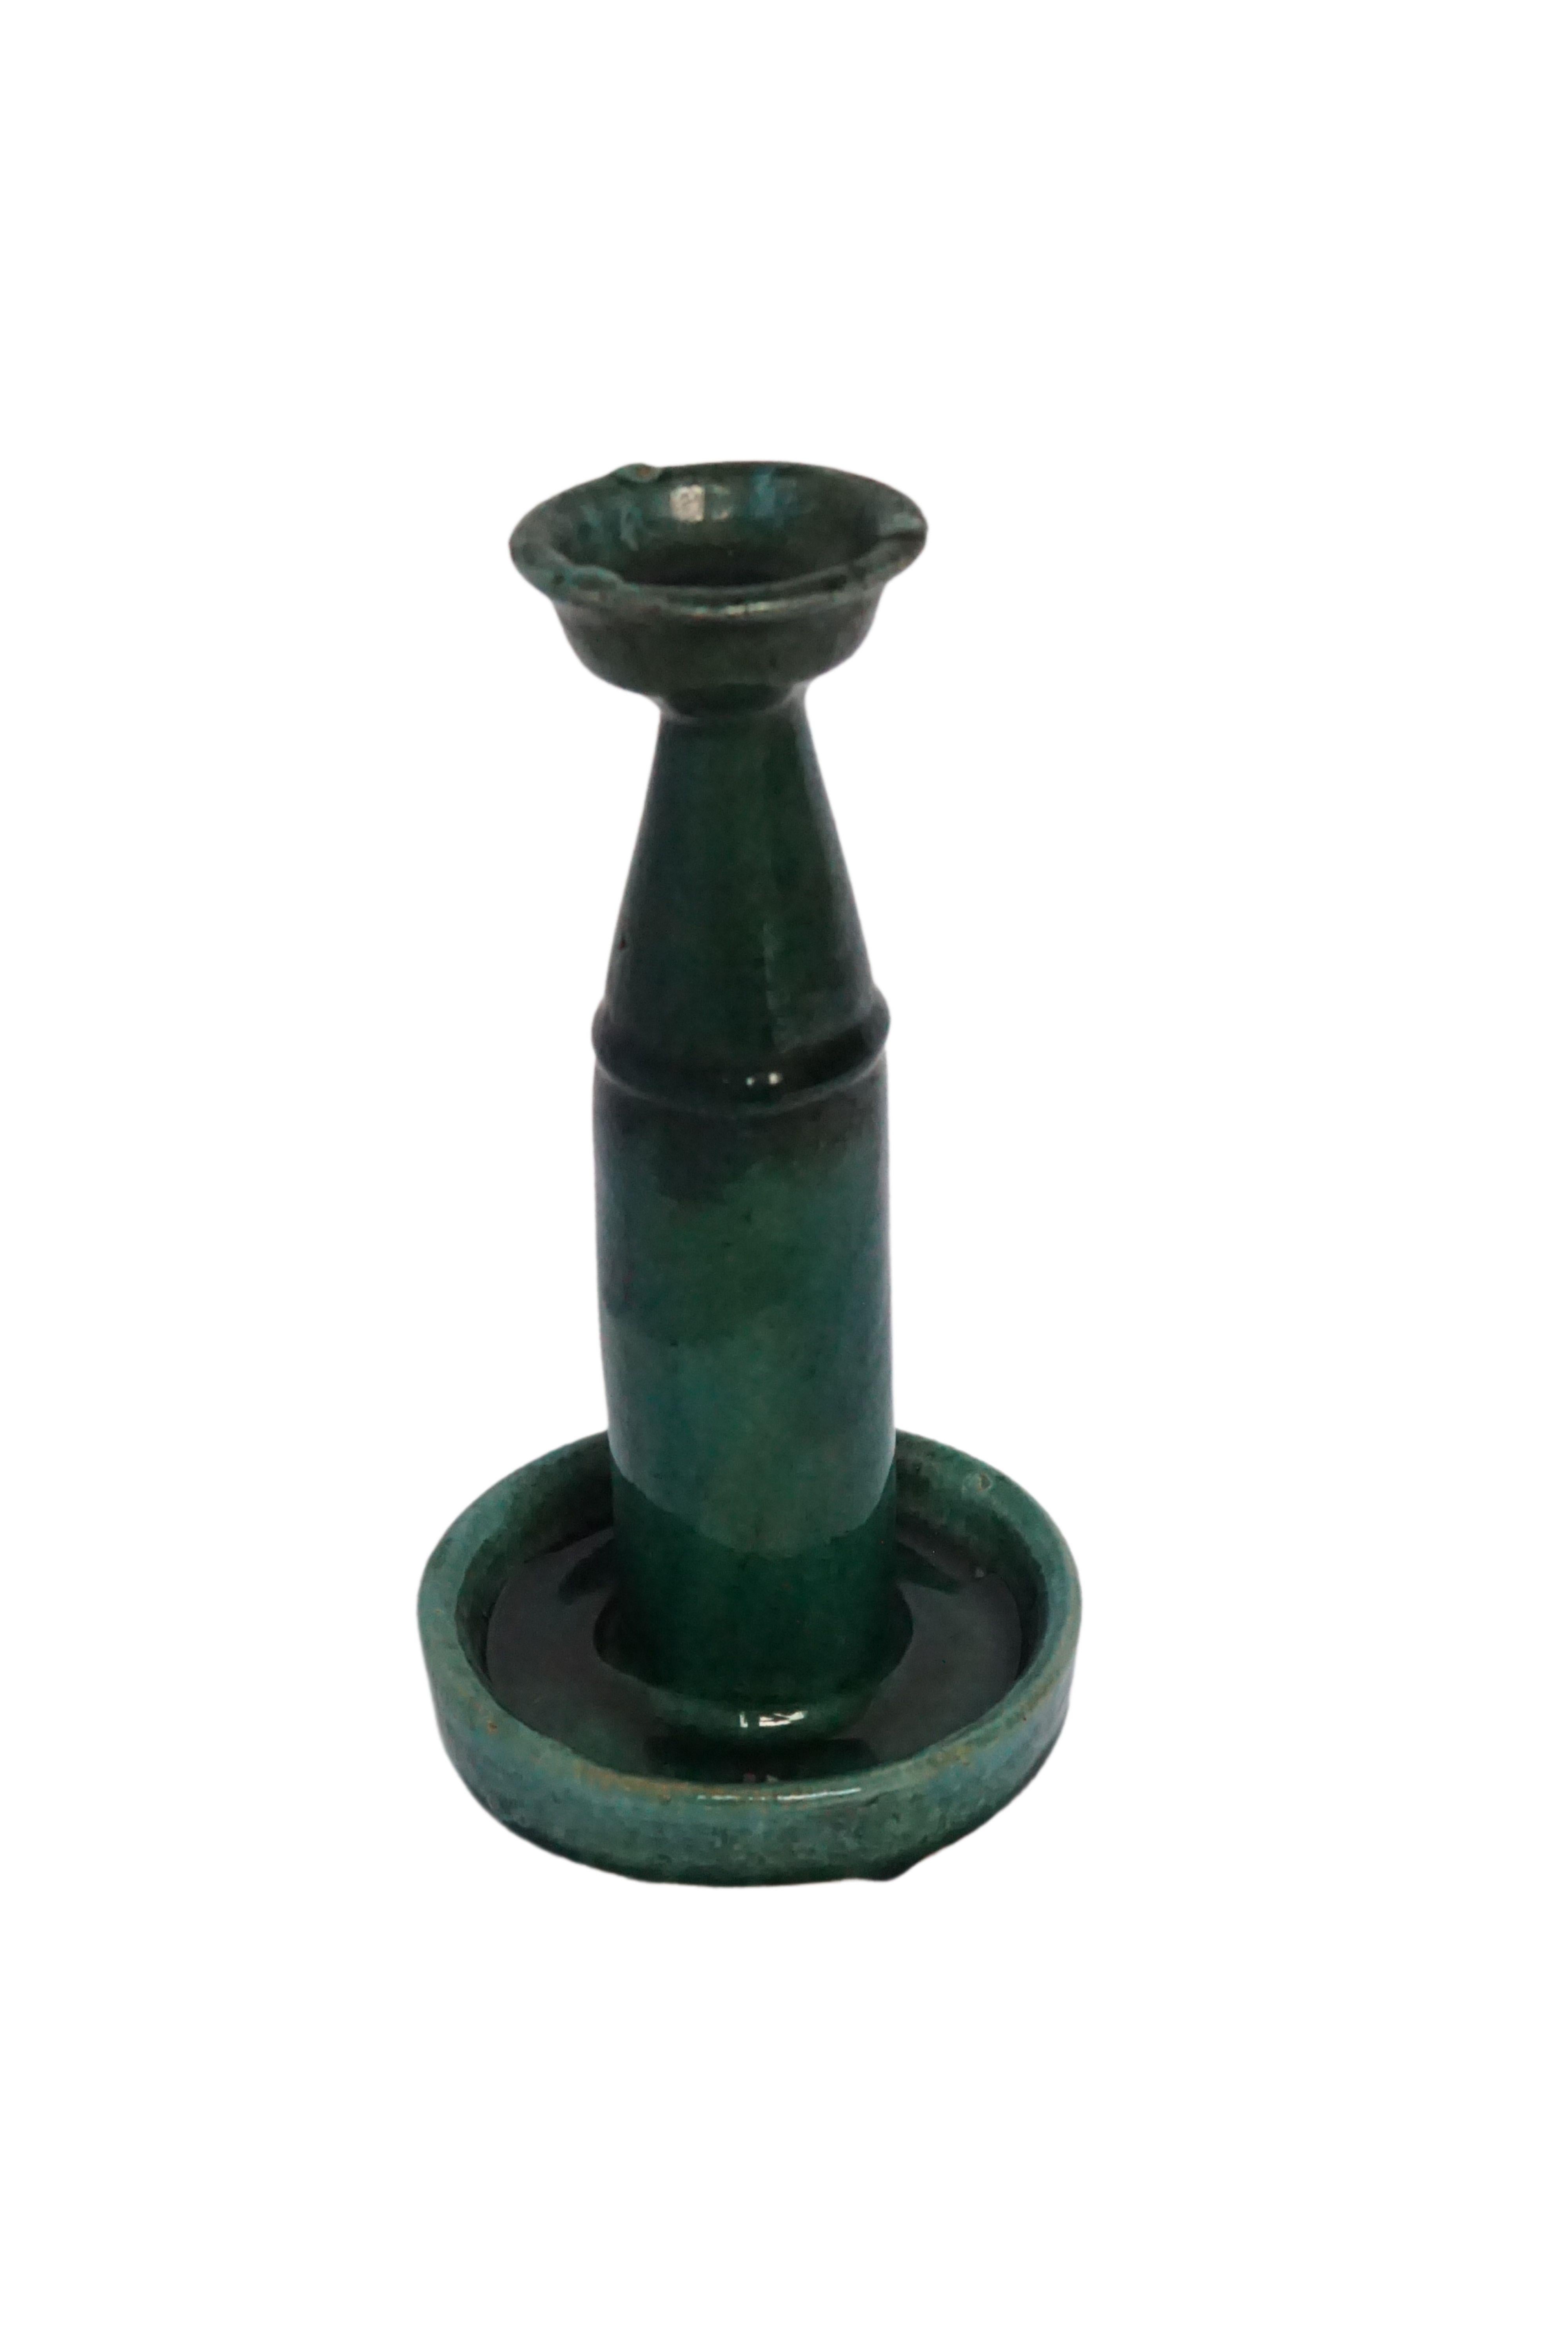 This Shiwan ware oil lamp from the Mid-20th century features a green glaze. Shiwan ware is a style of Chinese pottery from the Shiwanzhen district near Guangdong, China. A elegant decorative object or candleholder. 

Measures: diameter 12.5 cm